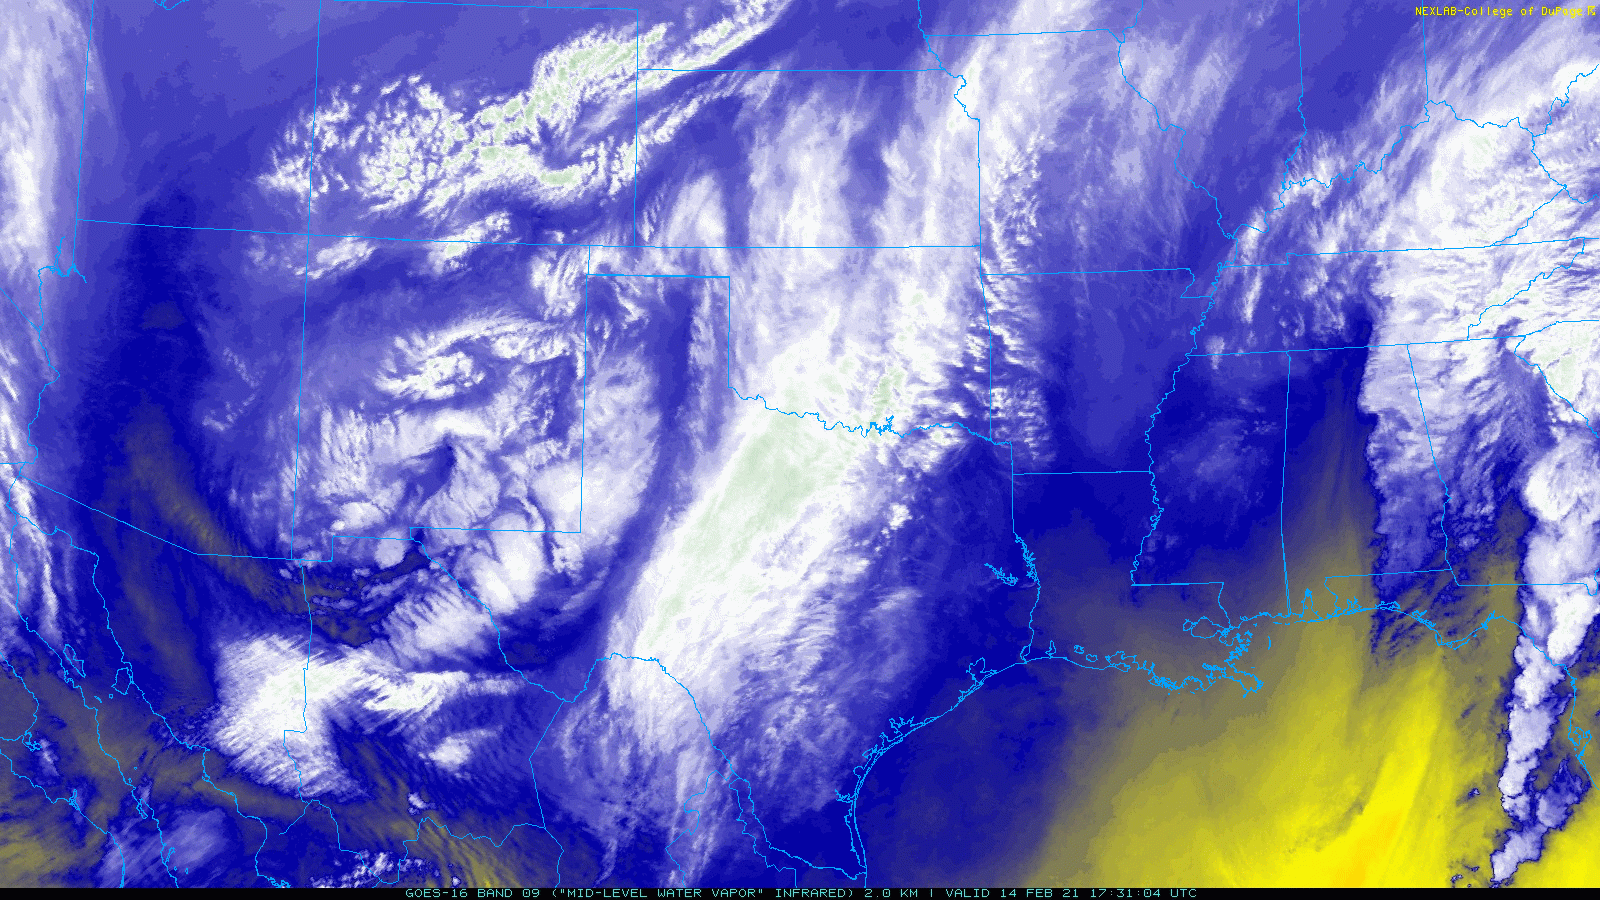 Mid-level water vapor imagery from GOES-16 valid from 11:31 am to 12:01 pm on 14 February 2021. A storm system approaching the region is seen supplying moisture and lift, which supported periods of snow.